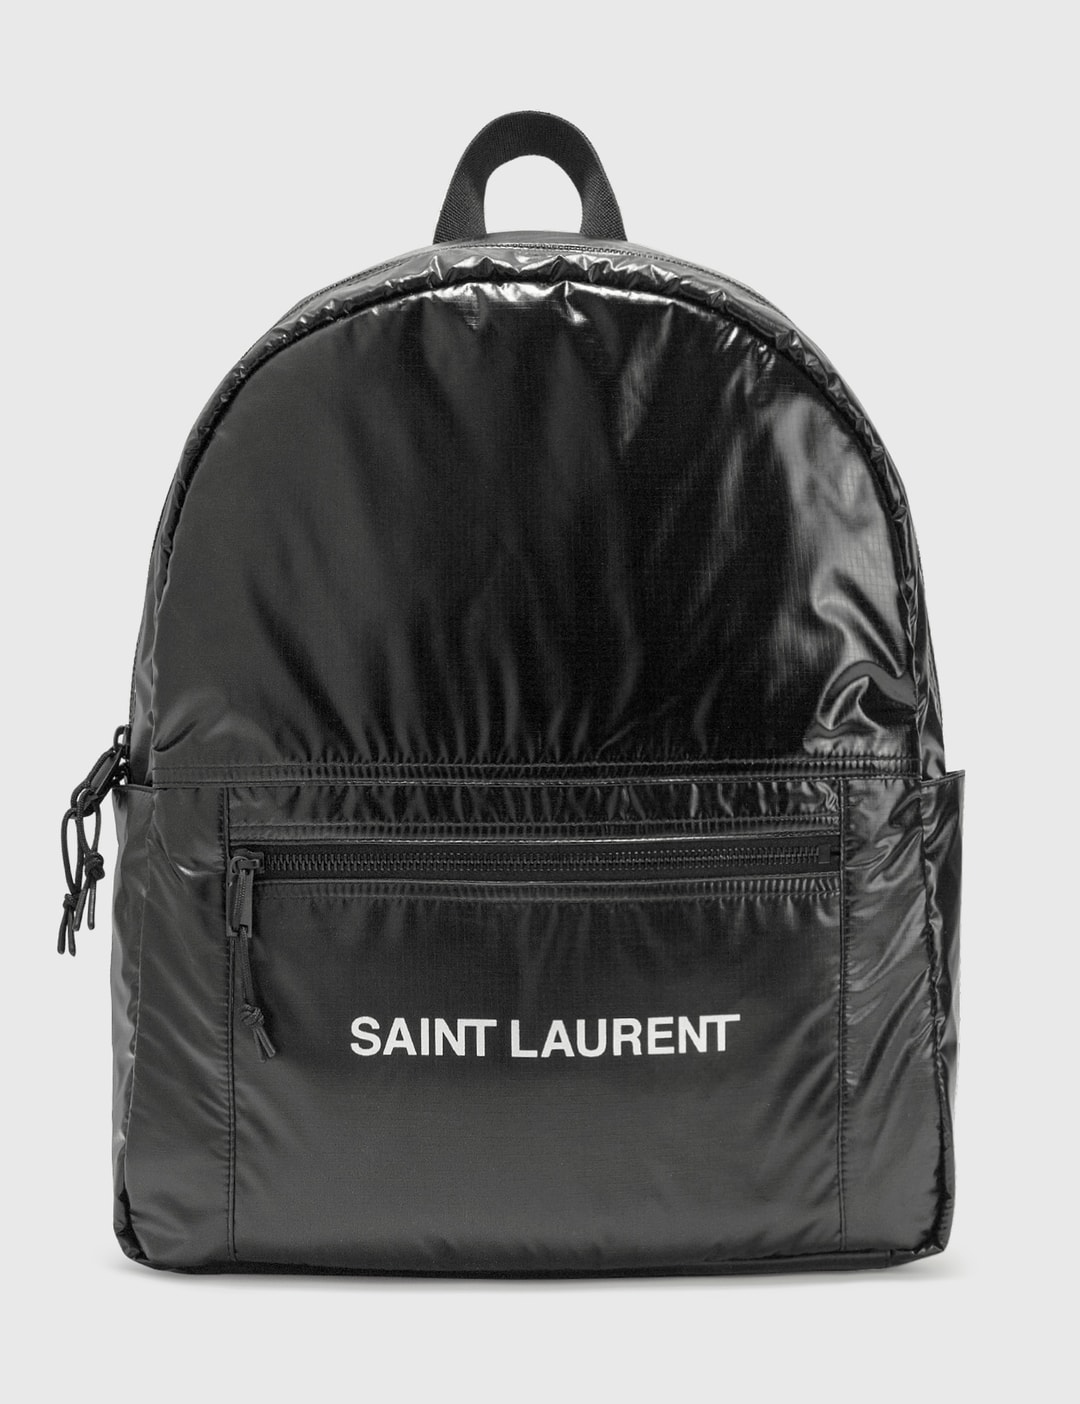 Saint Laurent - Nuxx Nylon Backpack | HBX - Globally Curated Fashion ...